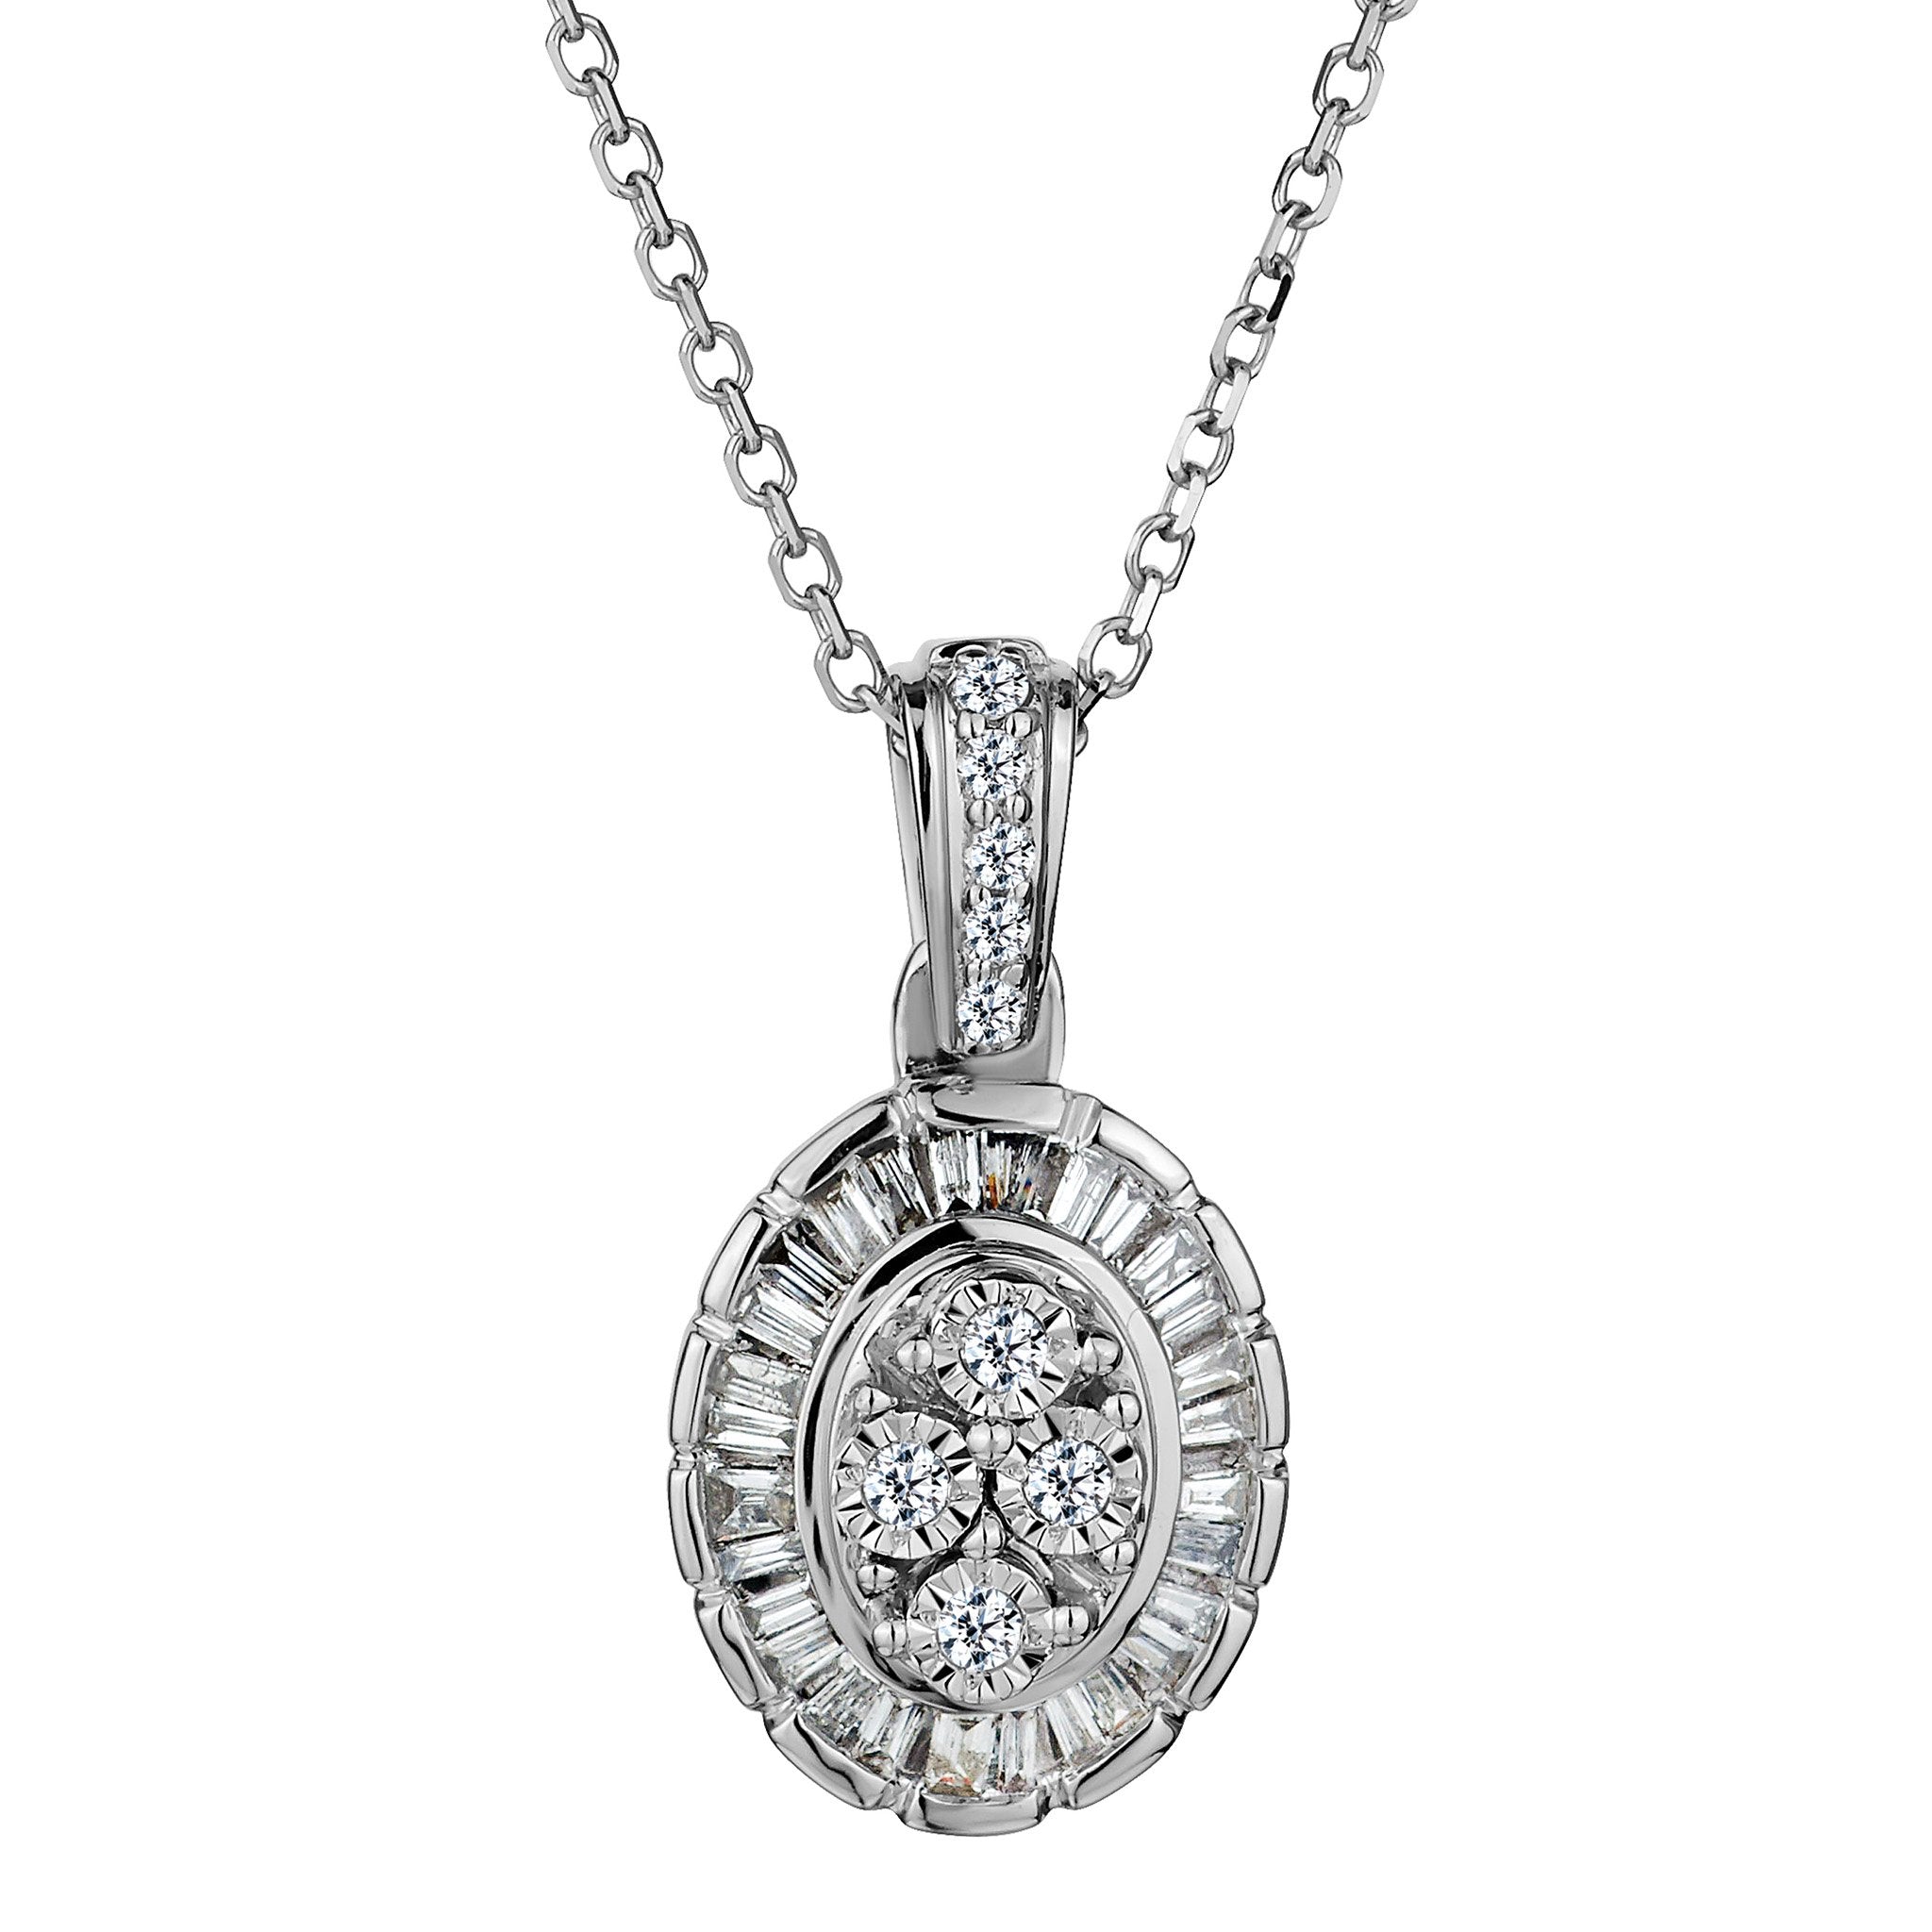 .15 Carat Diamond Oval With Halo Pendant,  10kt White Gold. Necklaces and Pendants. Griffin Jewellery Designs.